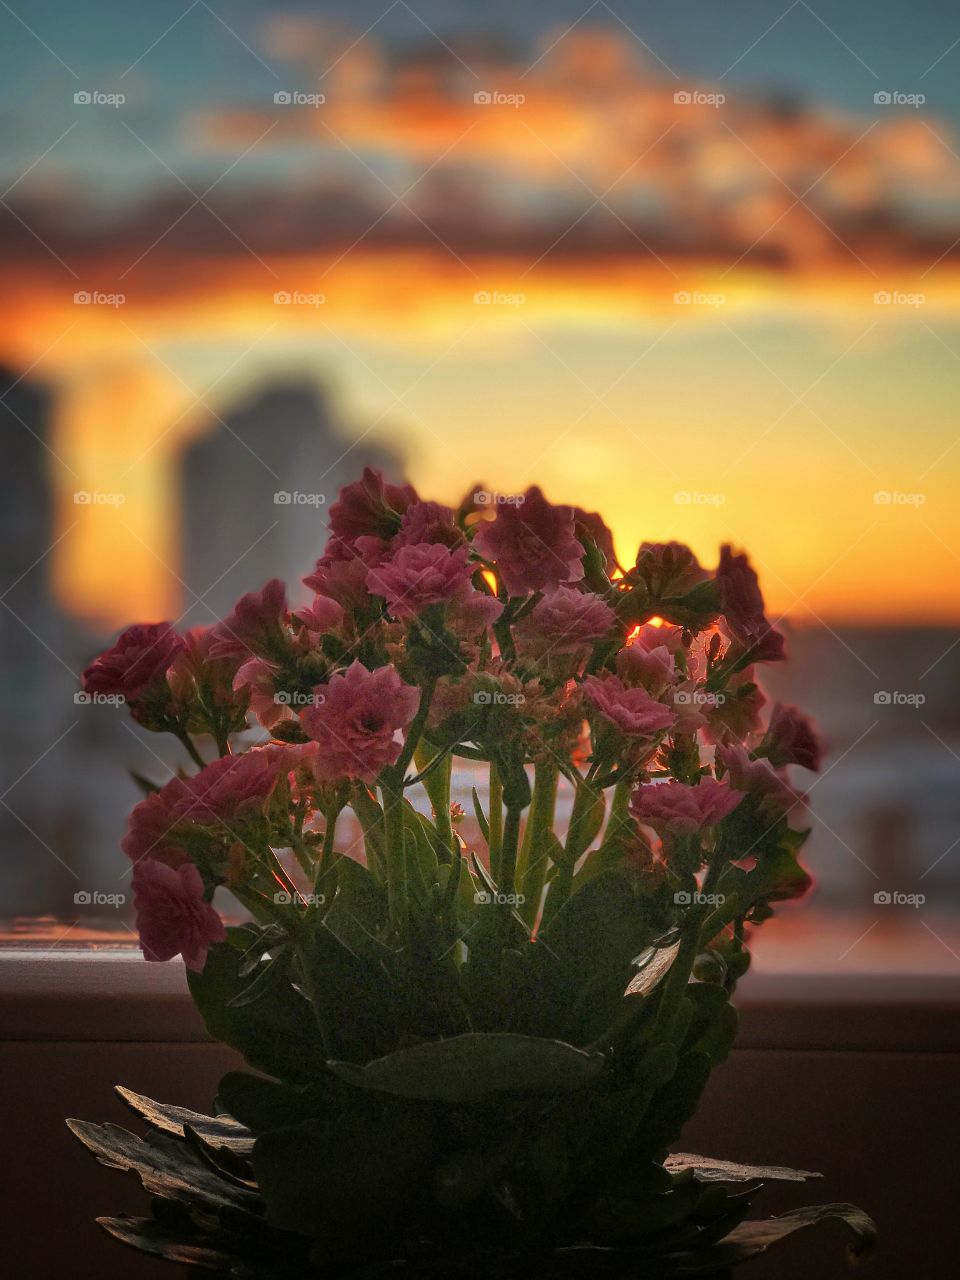 Flowers against the background of a city decline